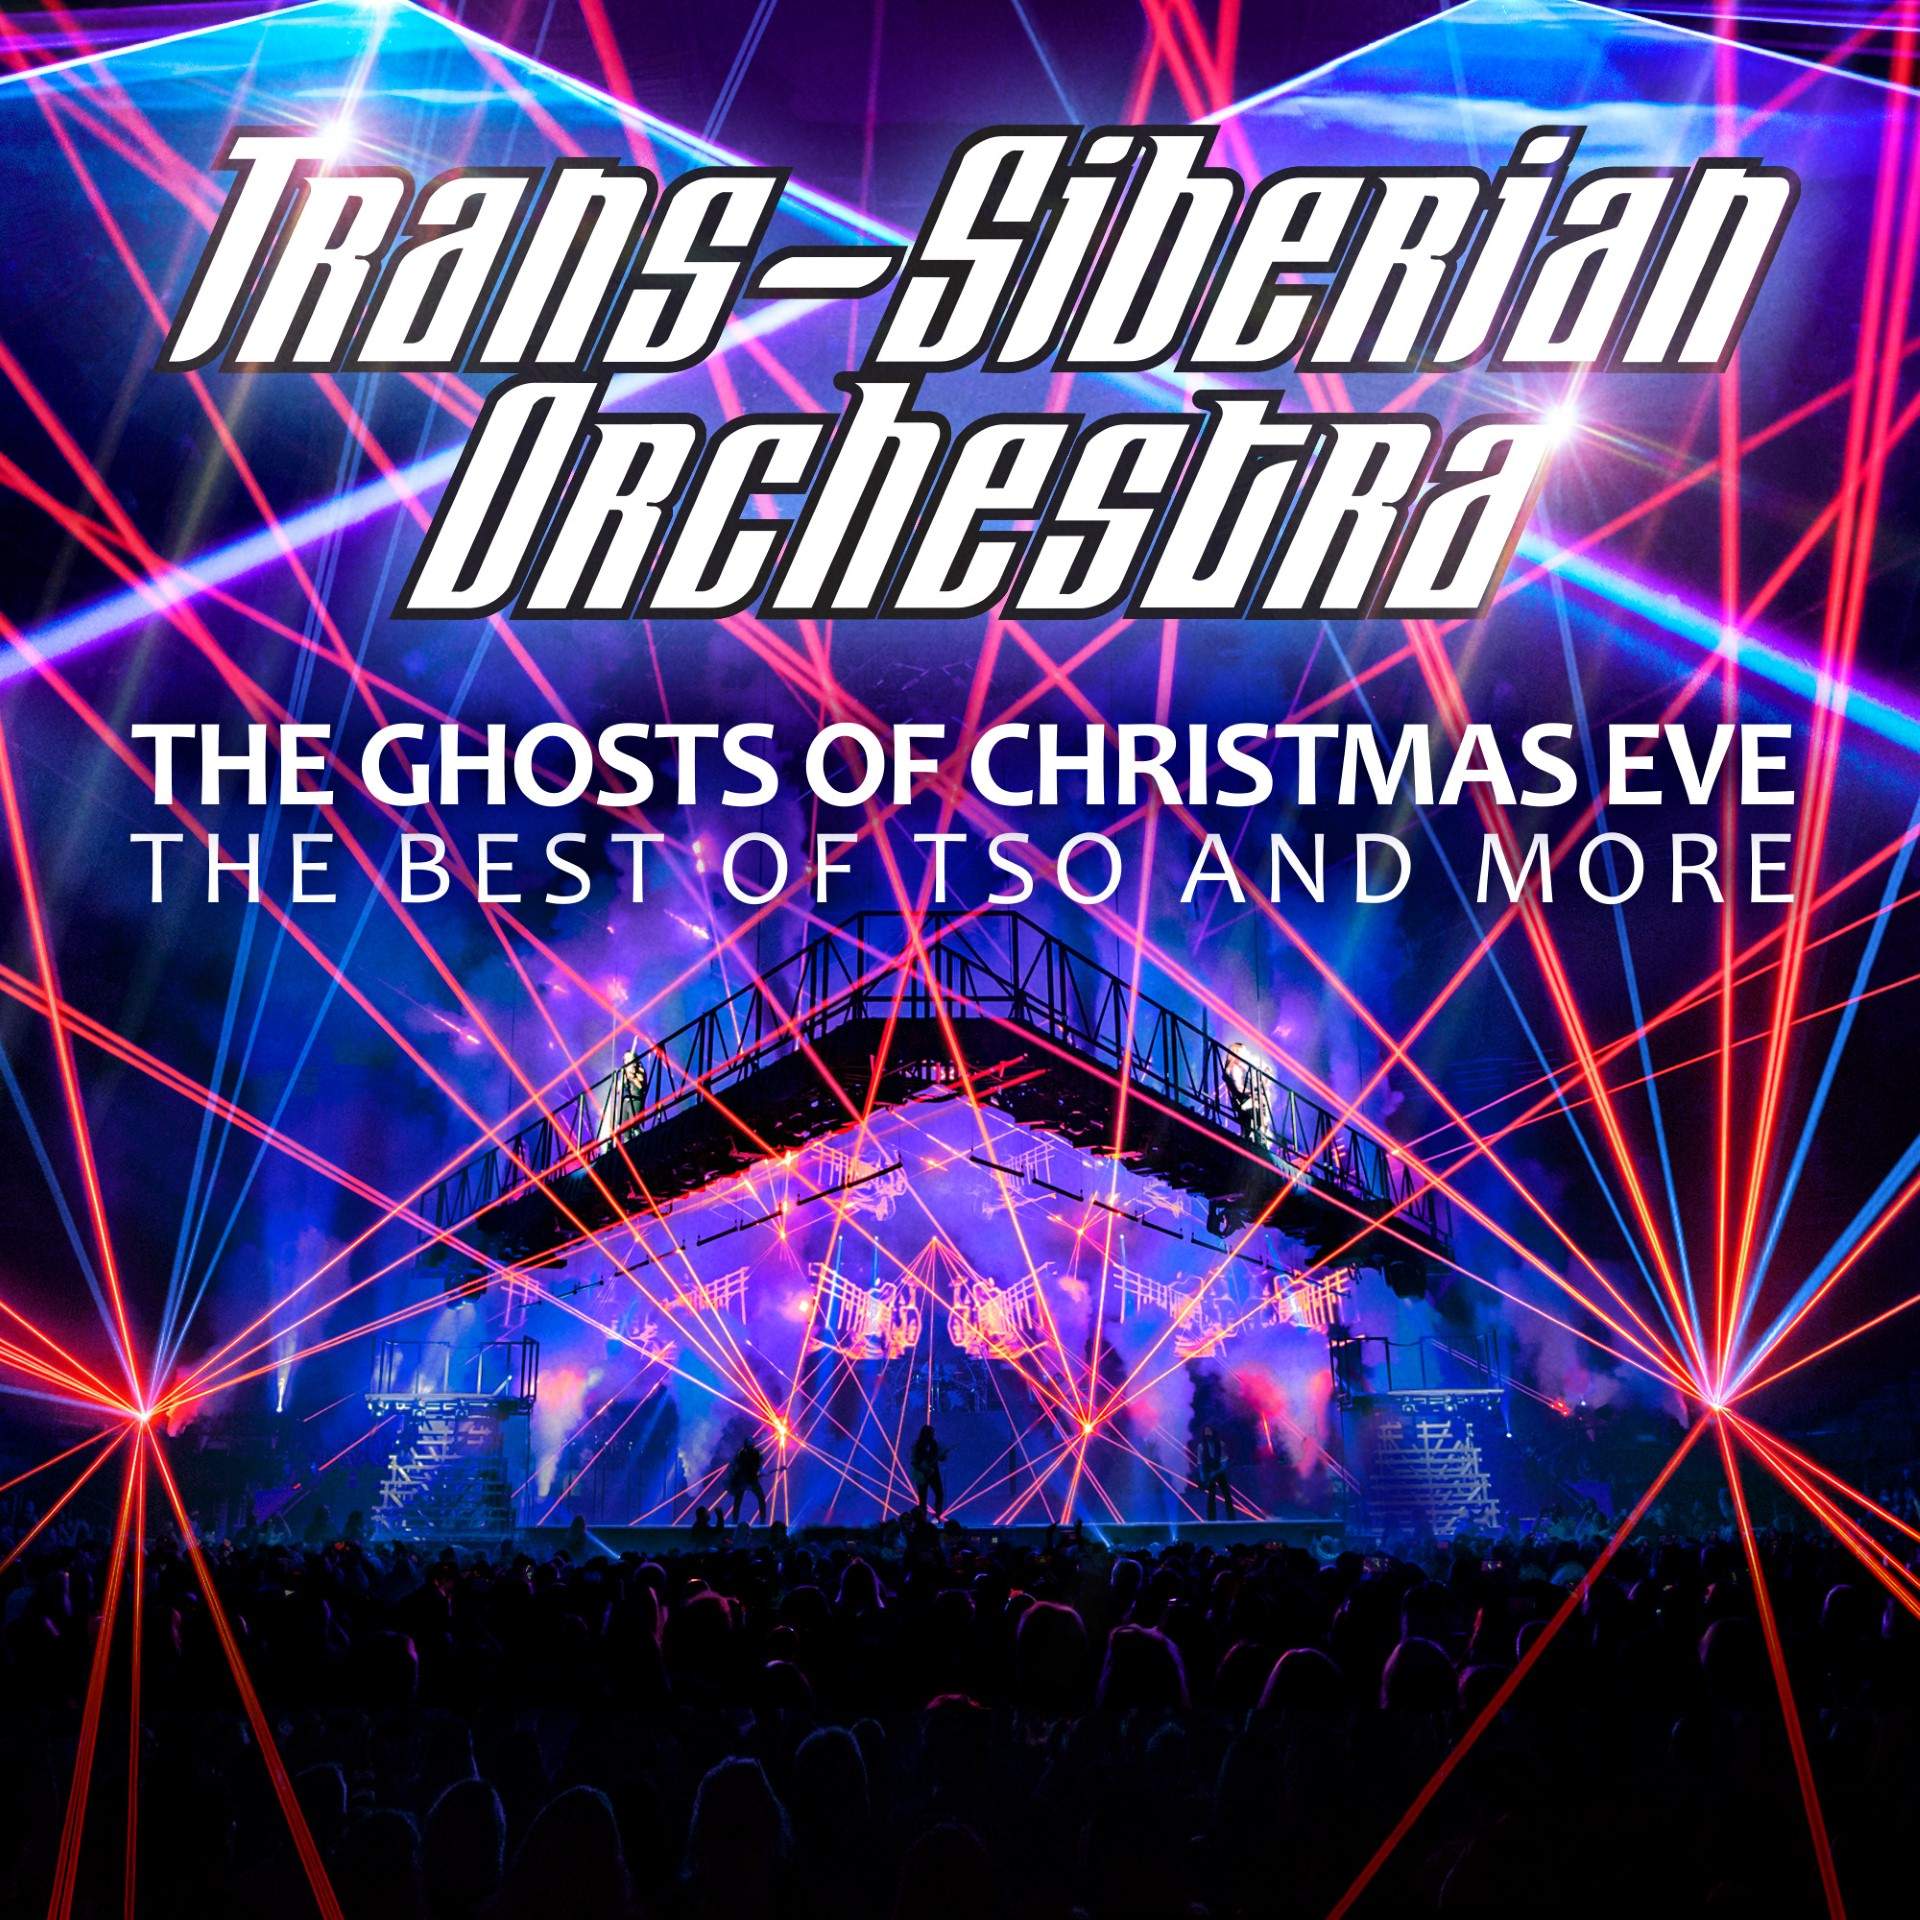 Mike The Intern talks with Al Pitrelli about the upcoming Trans-Siberian Orchestra